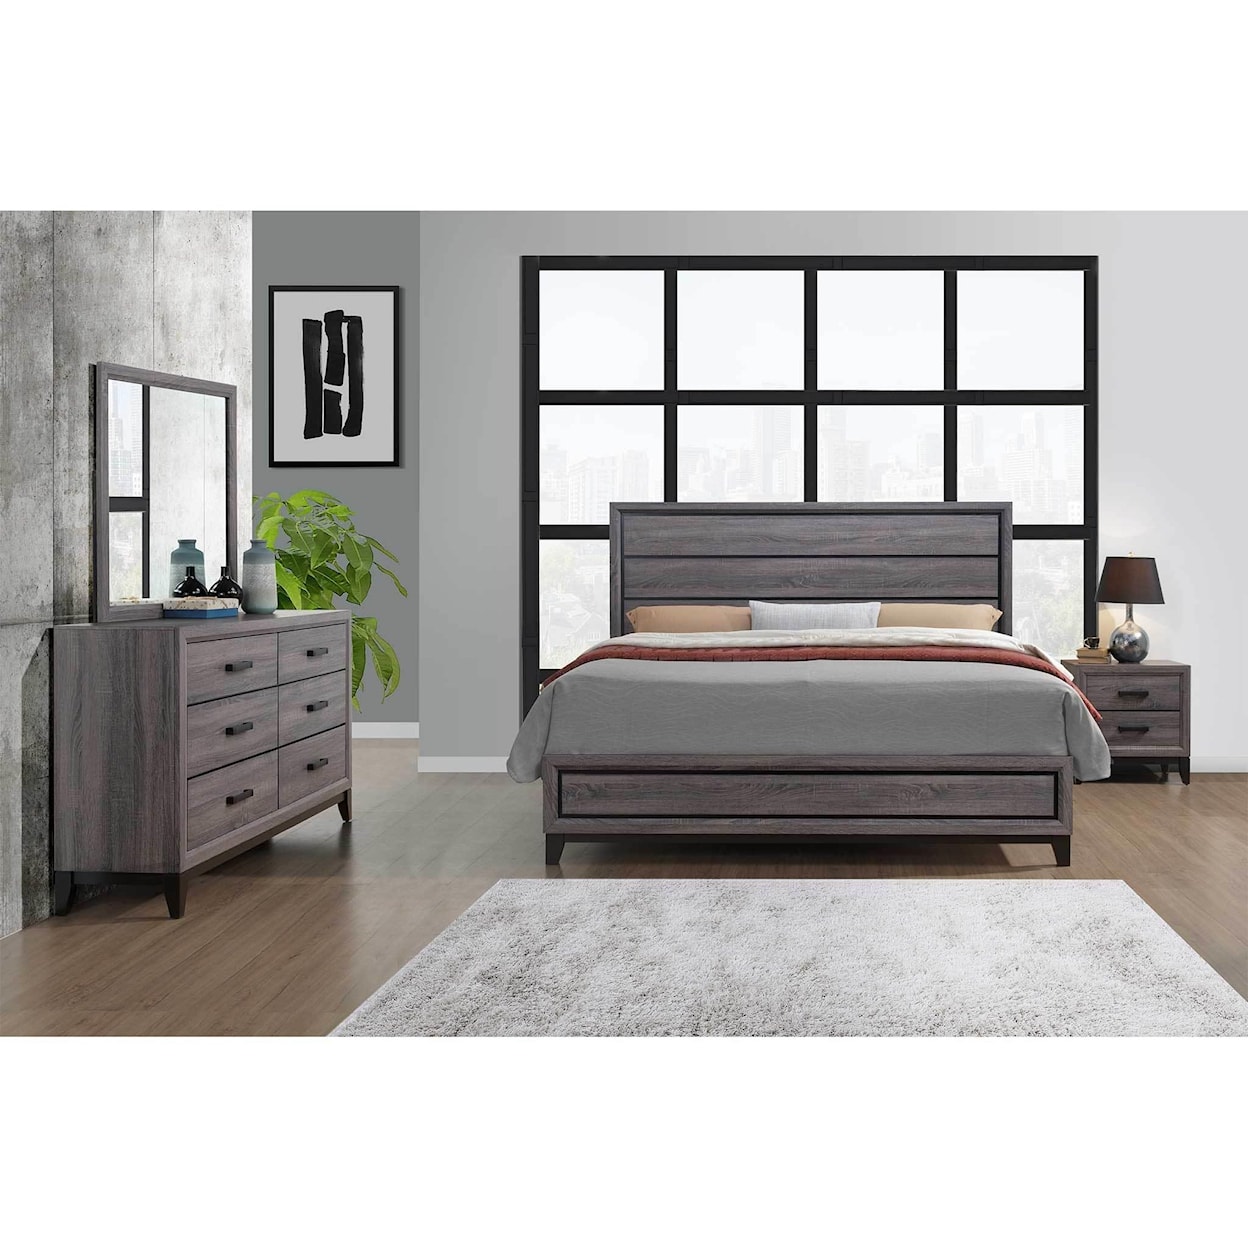 Global Furniture Kate 5PC Queen Bedroom Group